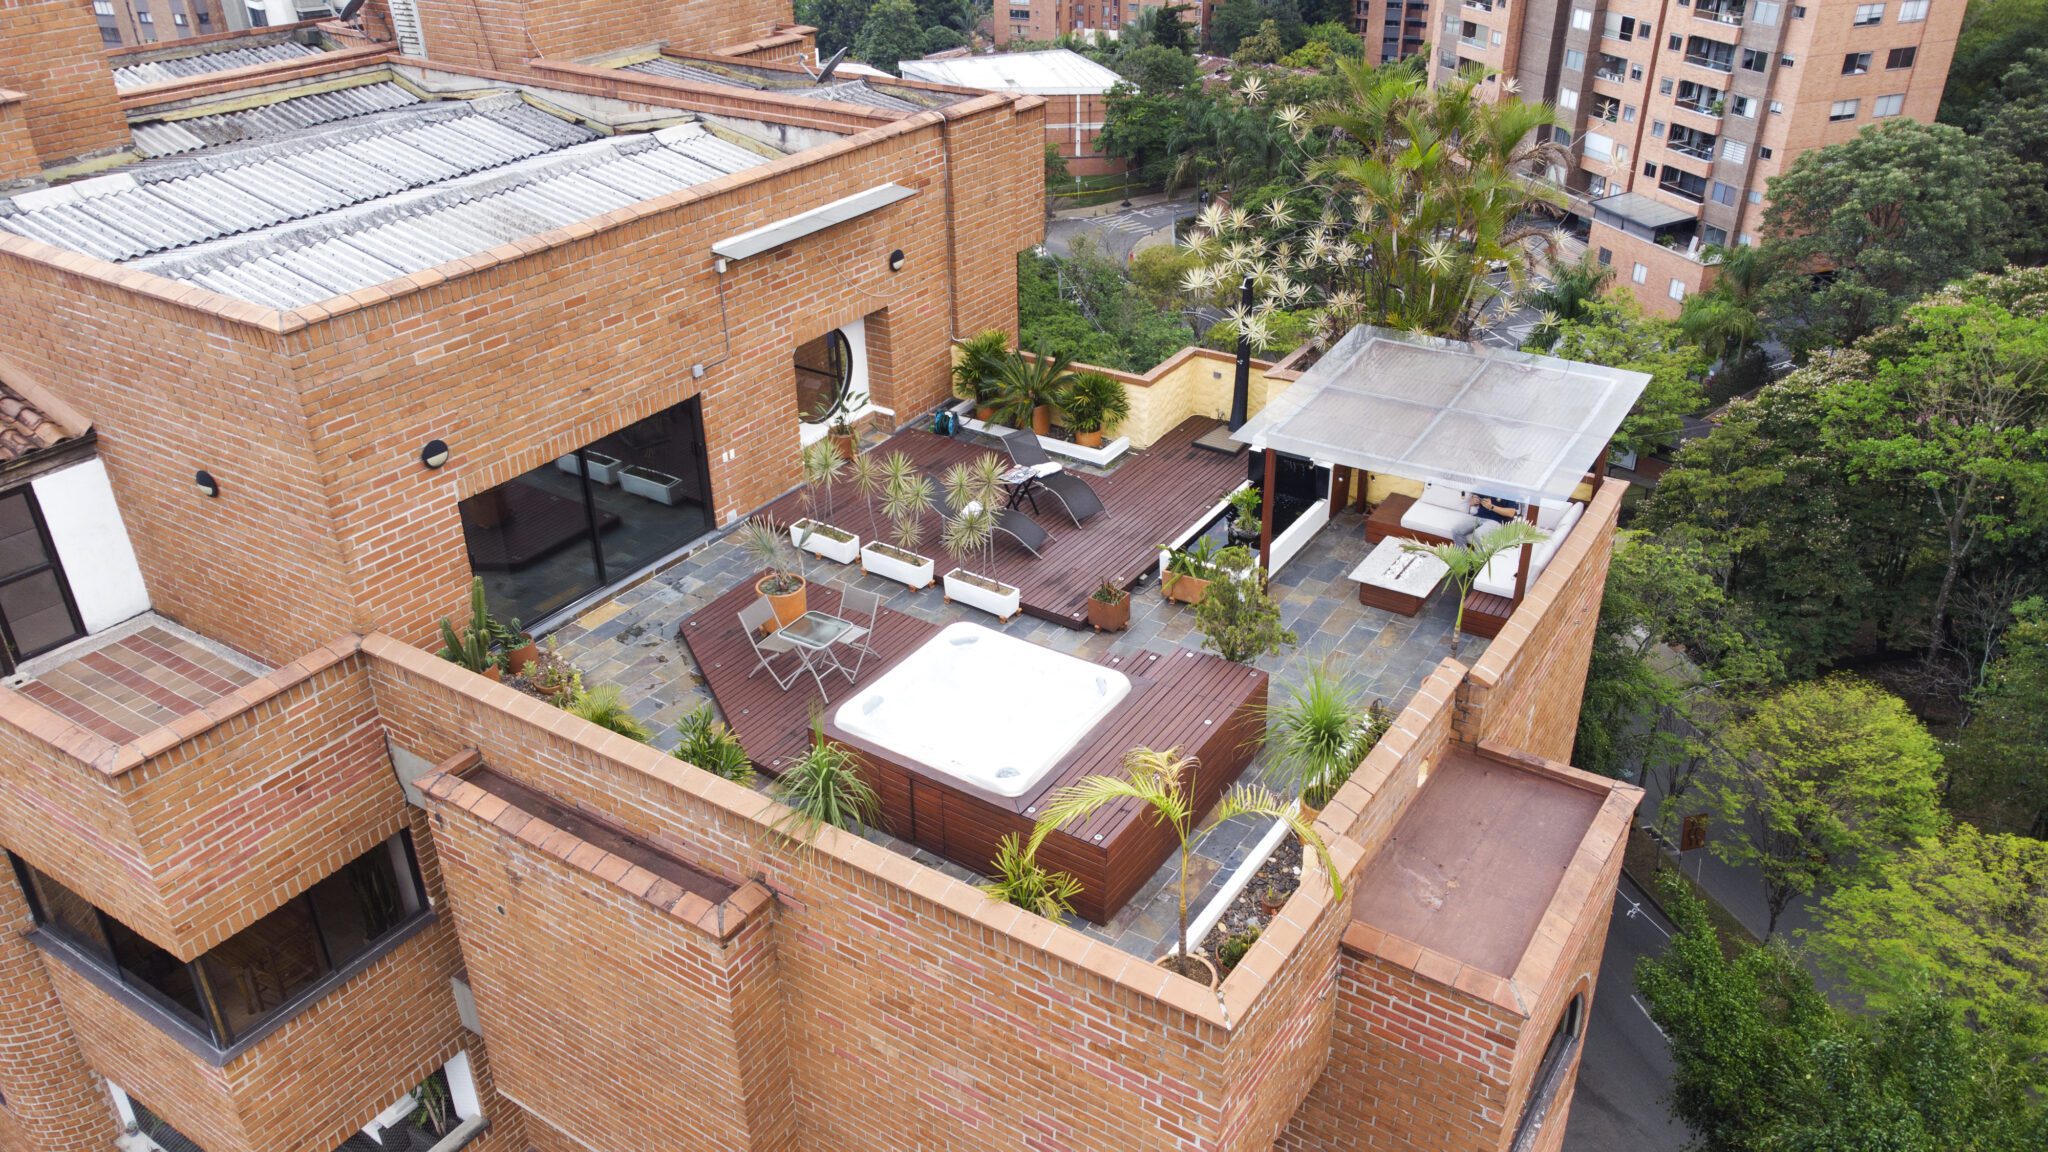 Exclusive El Poblado Penthouse With Two Rooftop Terraces, 360 Degree City Views, Floor-To-Ceiling Windows, and More